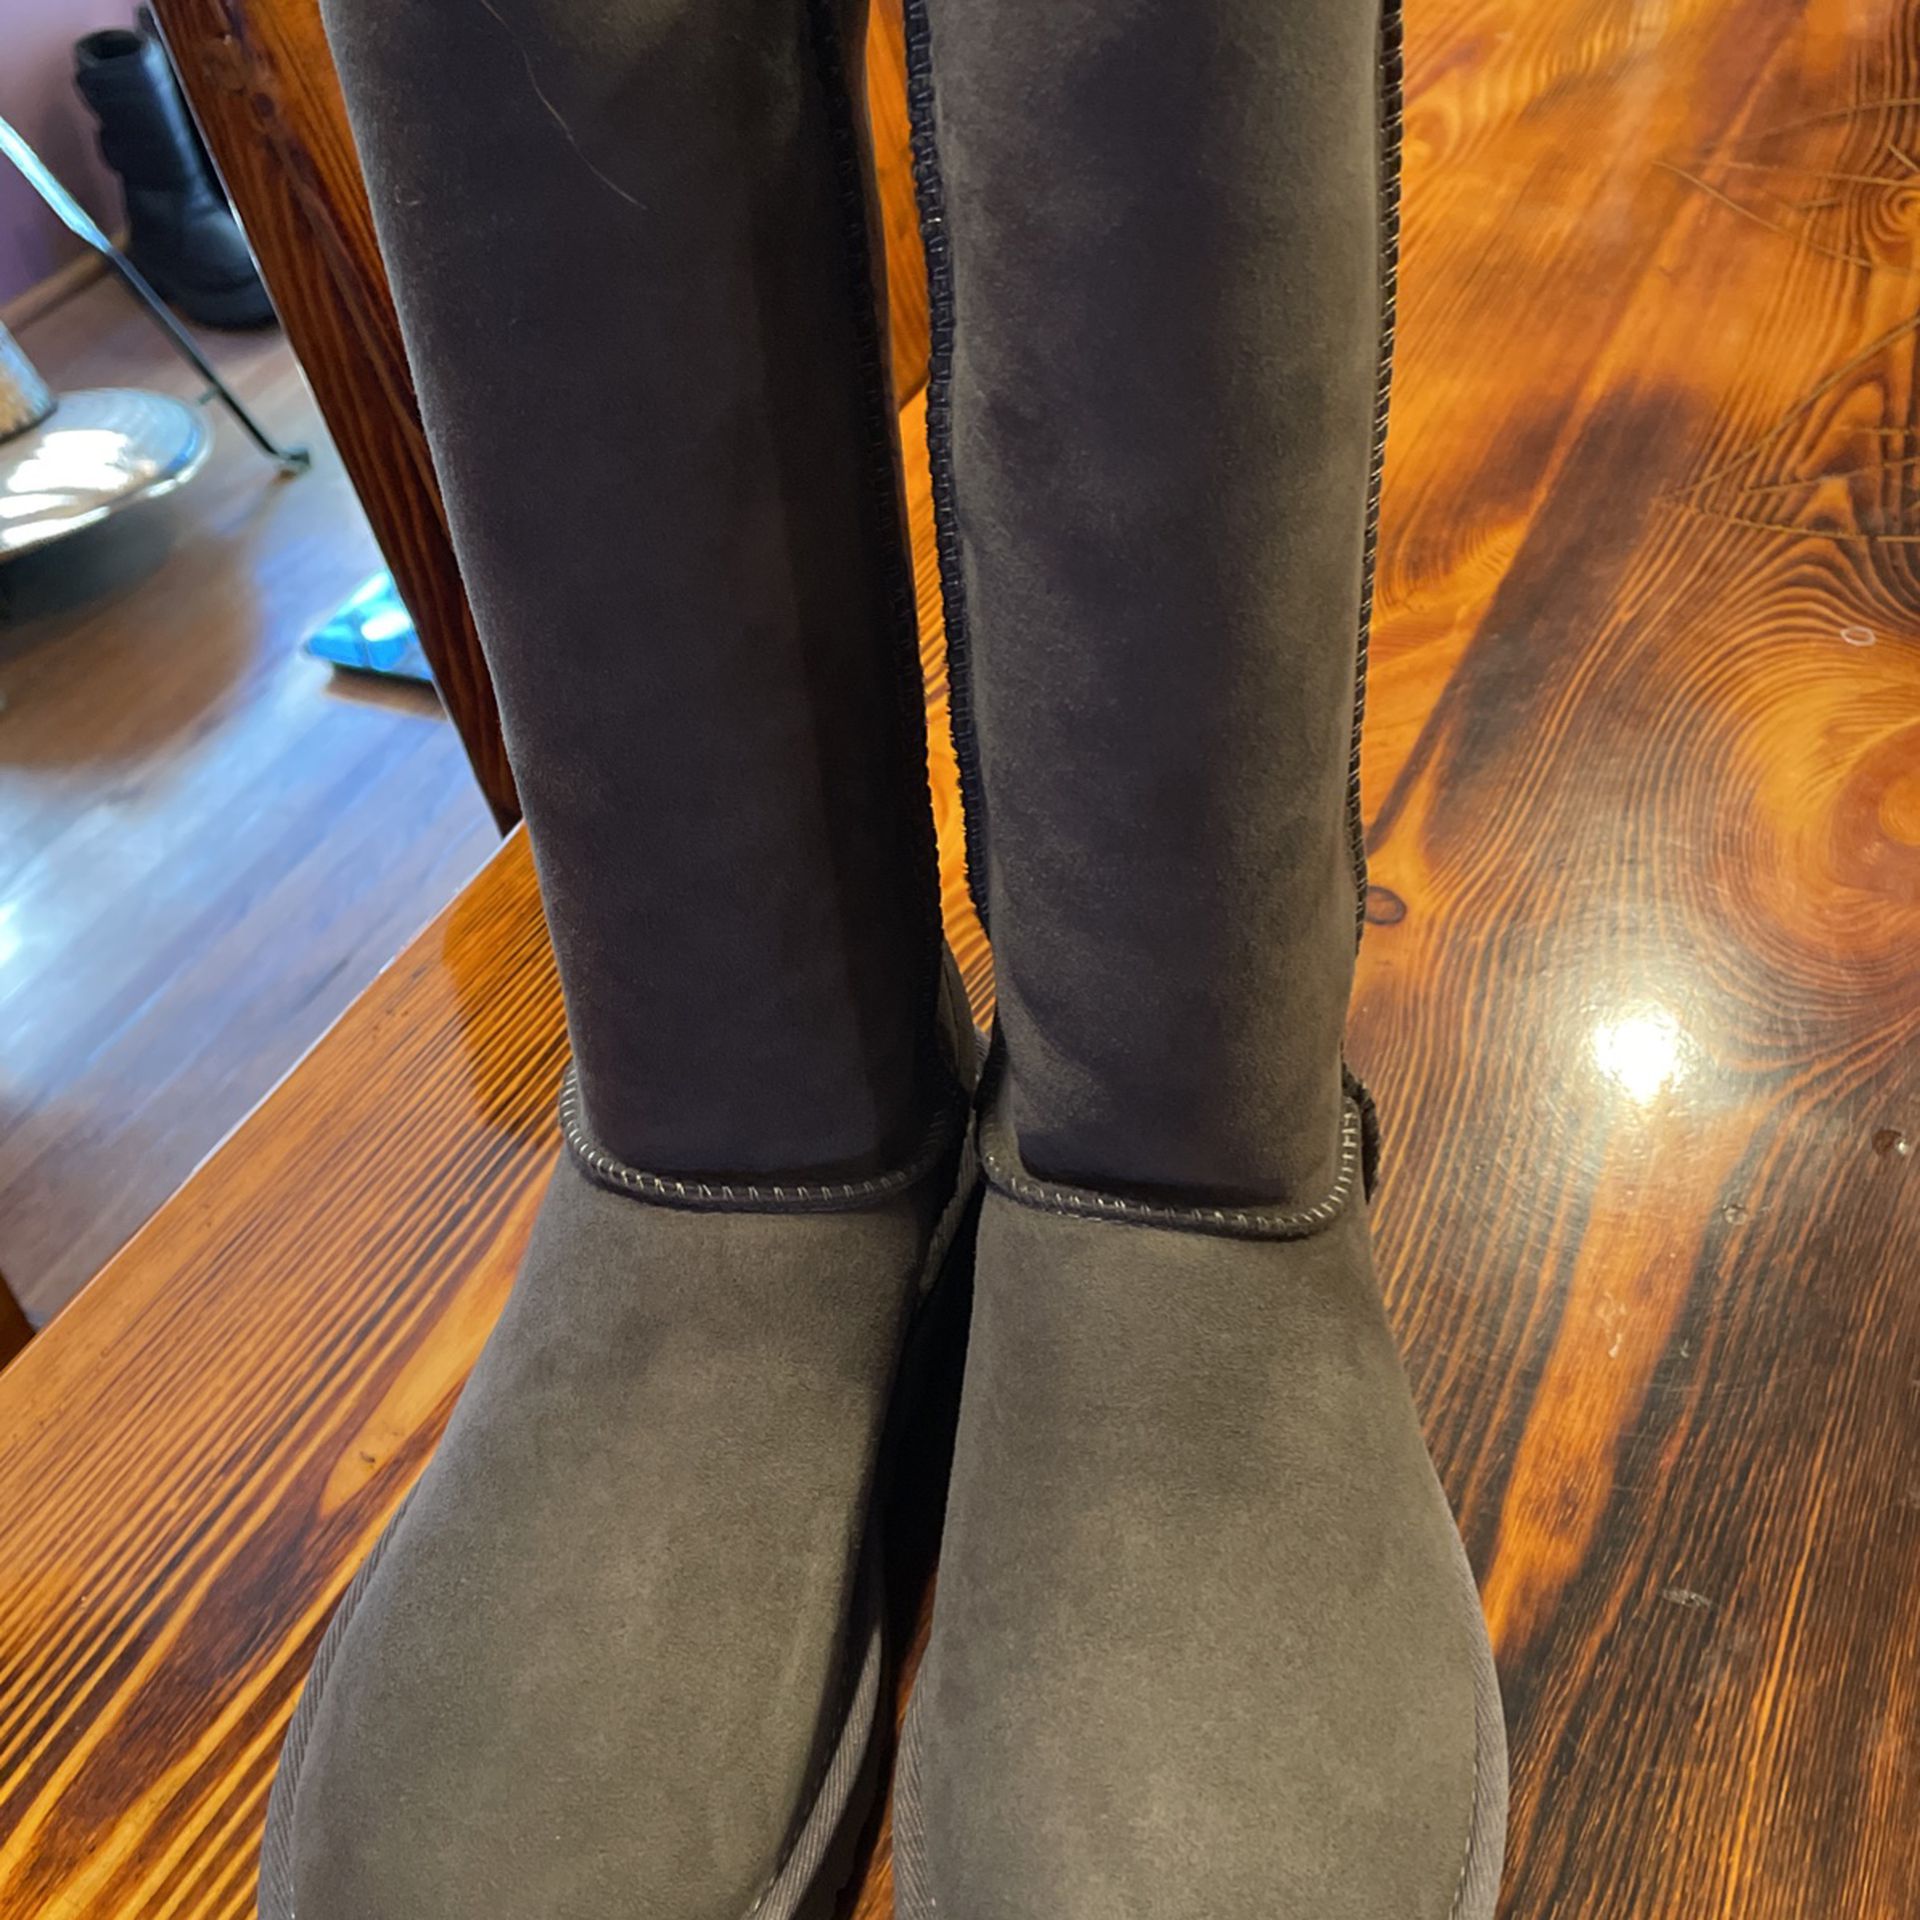 NEW GREY UGG BOOTS SIZE 7